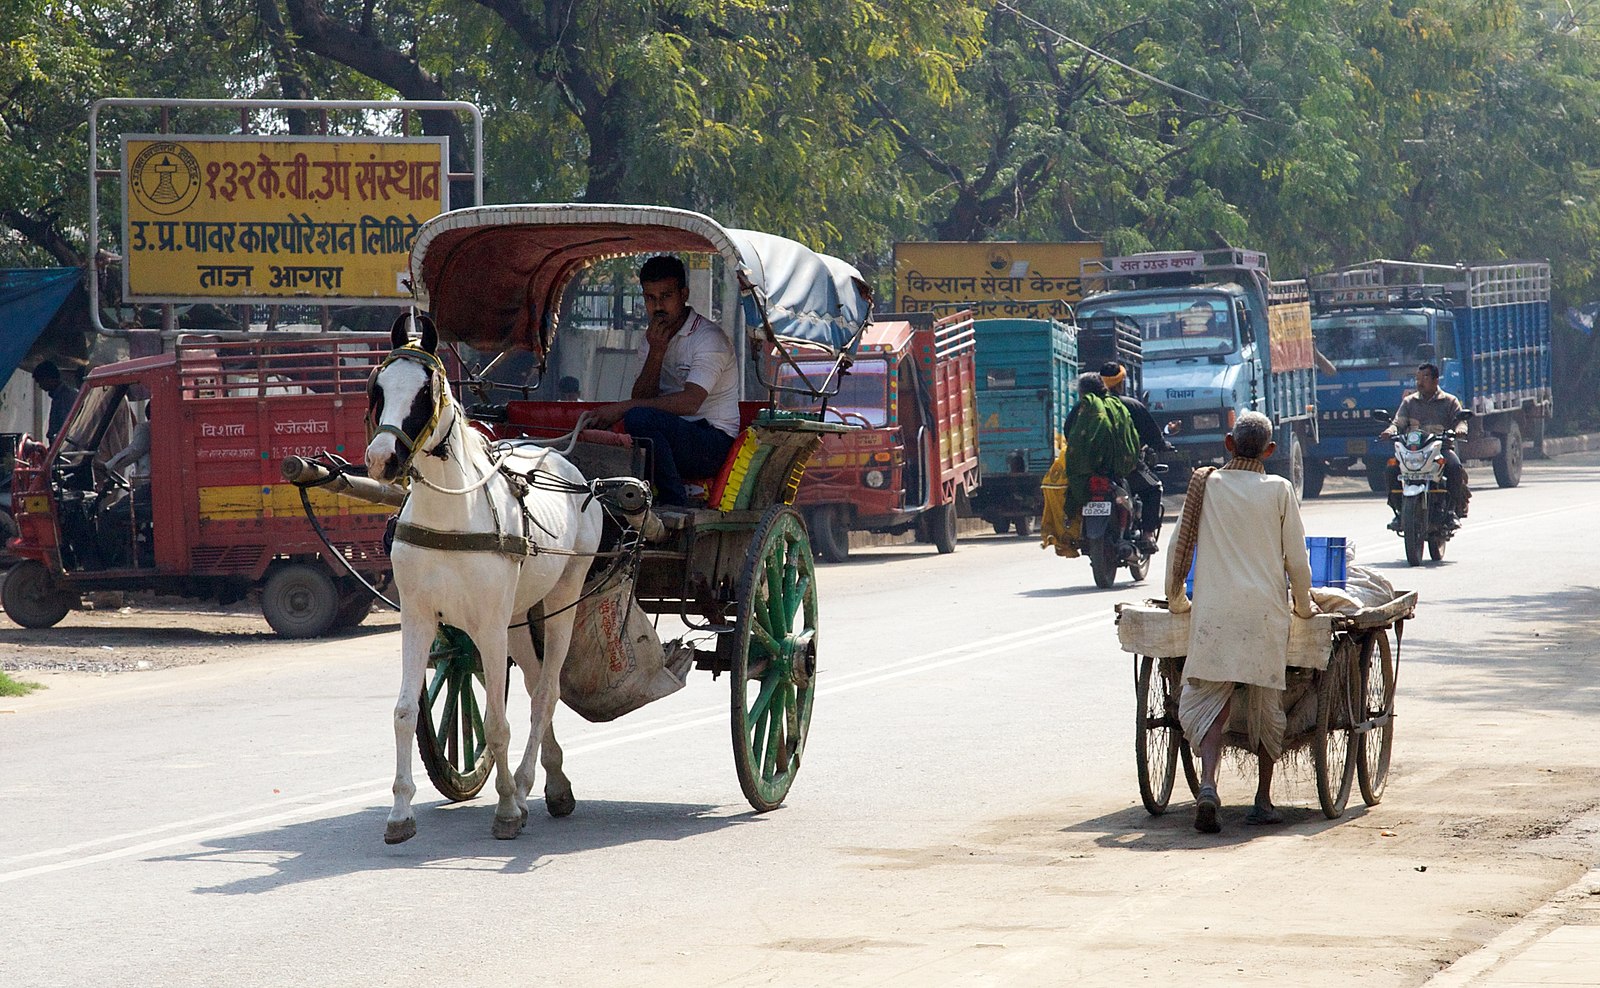 Different modes of road transport, on a road in India